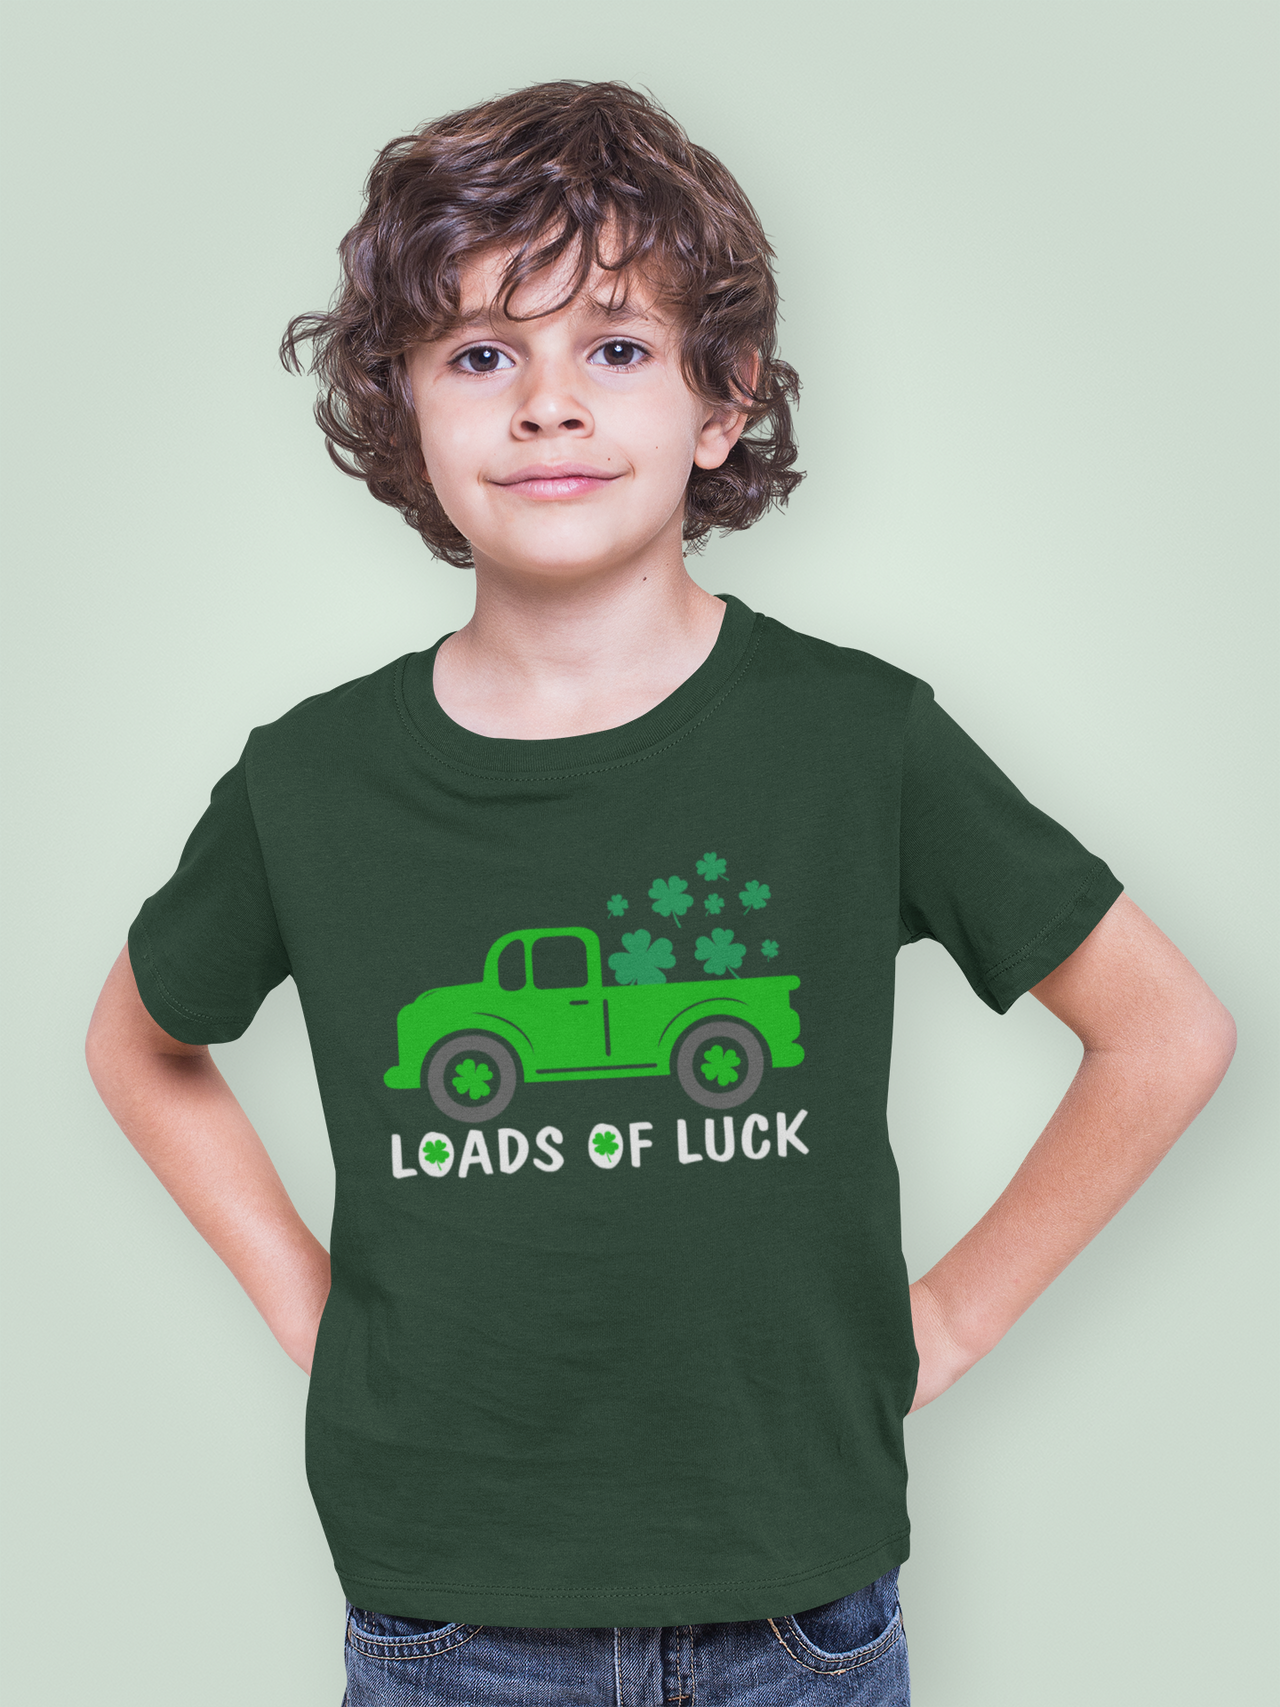 Kids St. Patrick's Day T-Shirt - Loads of Luck Vintage Truck with Shamrock Clovers - Lucky Tee Shirt